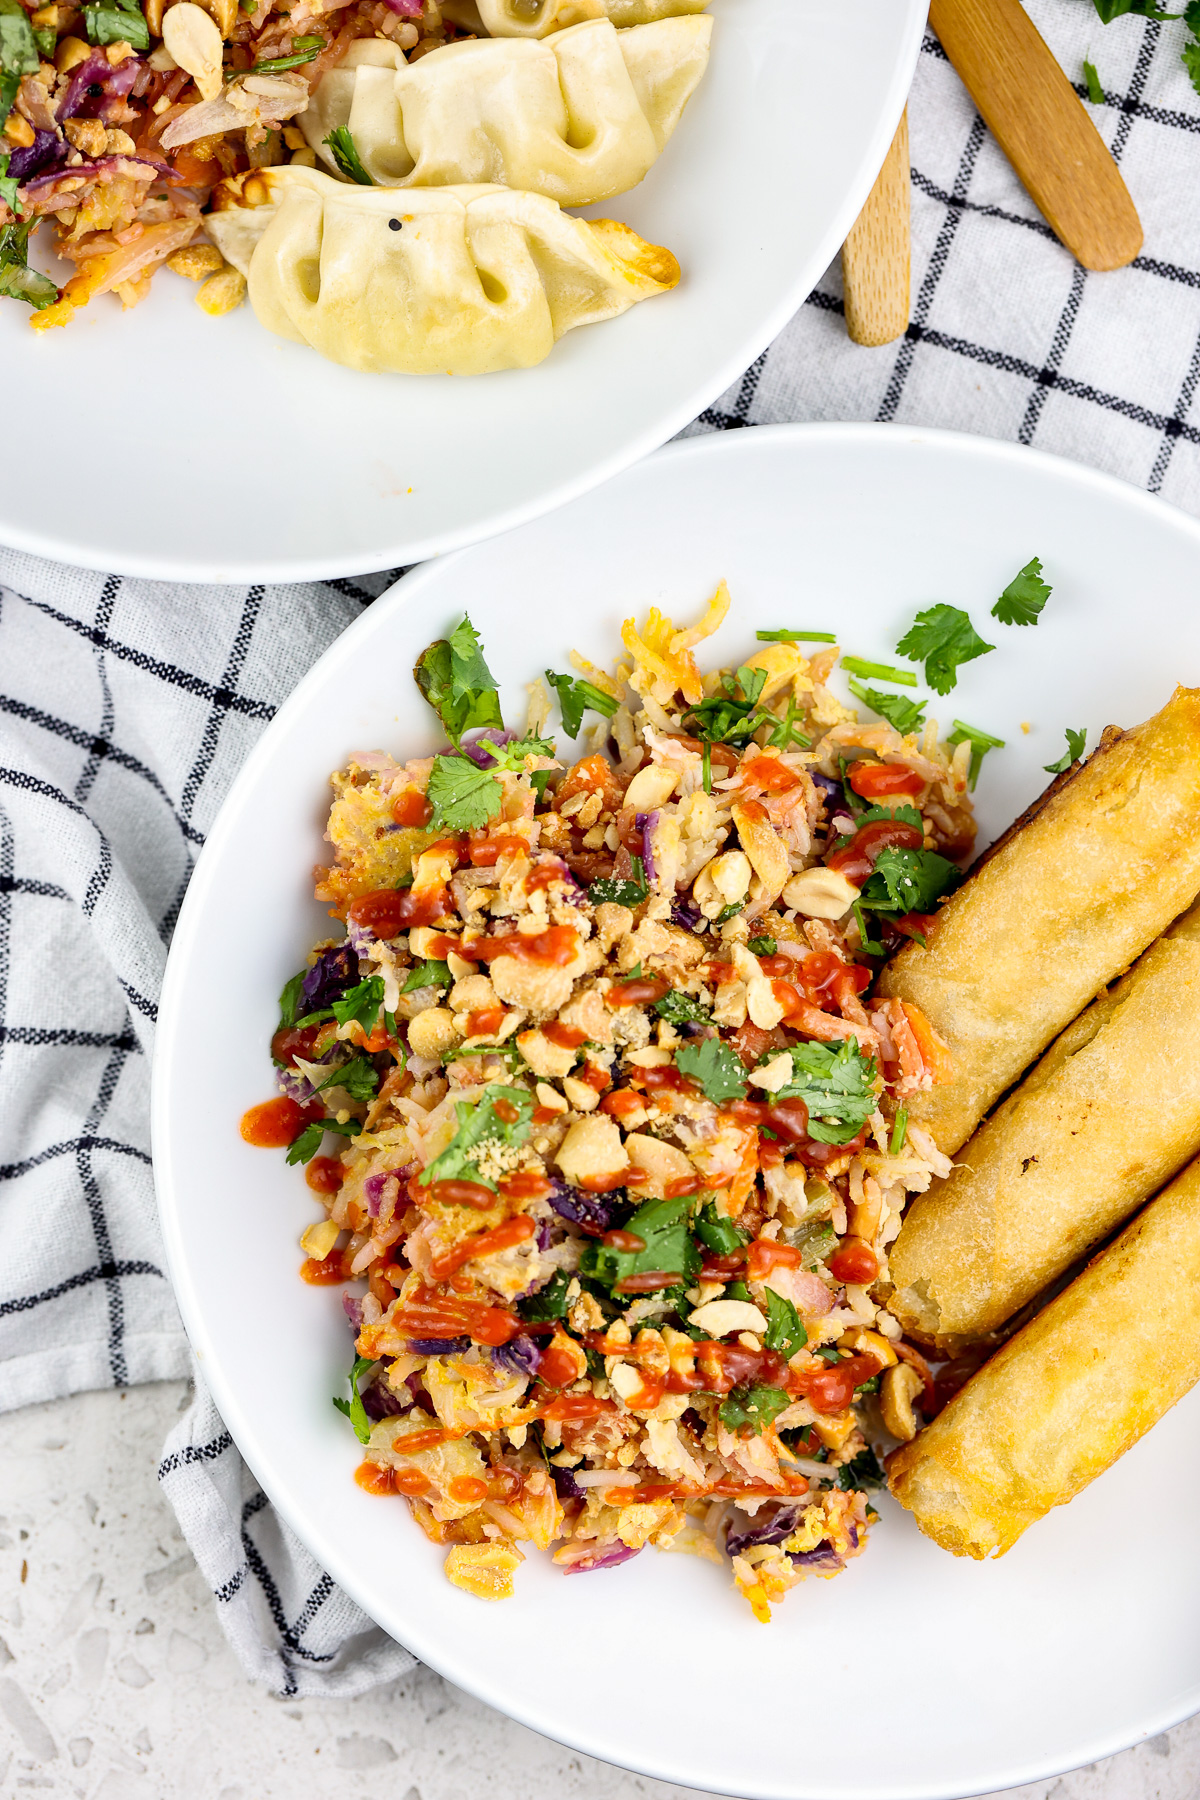 Picture of white rimmed bowl with veggies and fried rice with 3 egg rolls on the side and red sauce drizzled over the top.